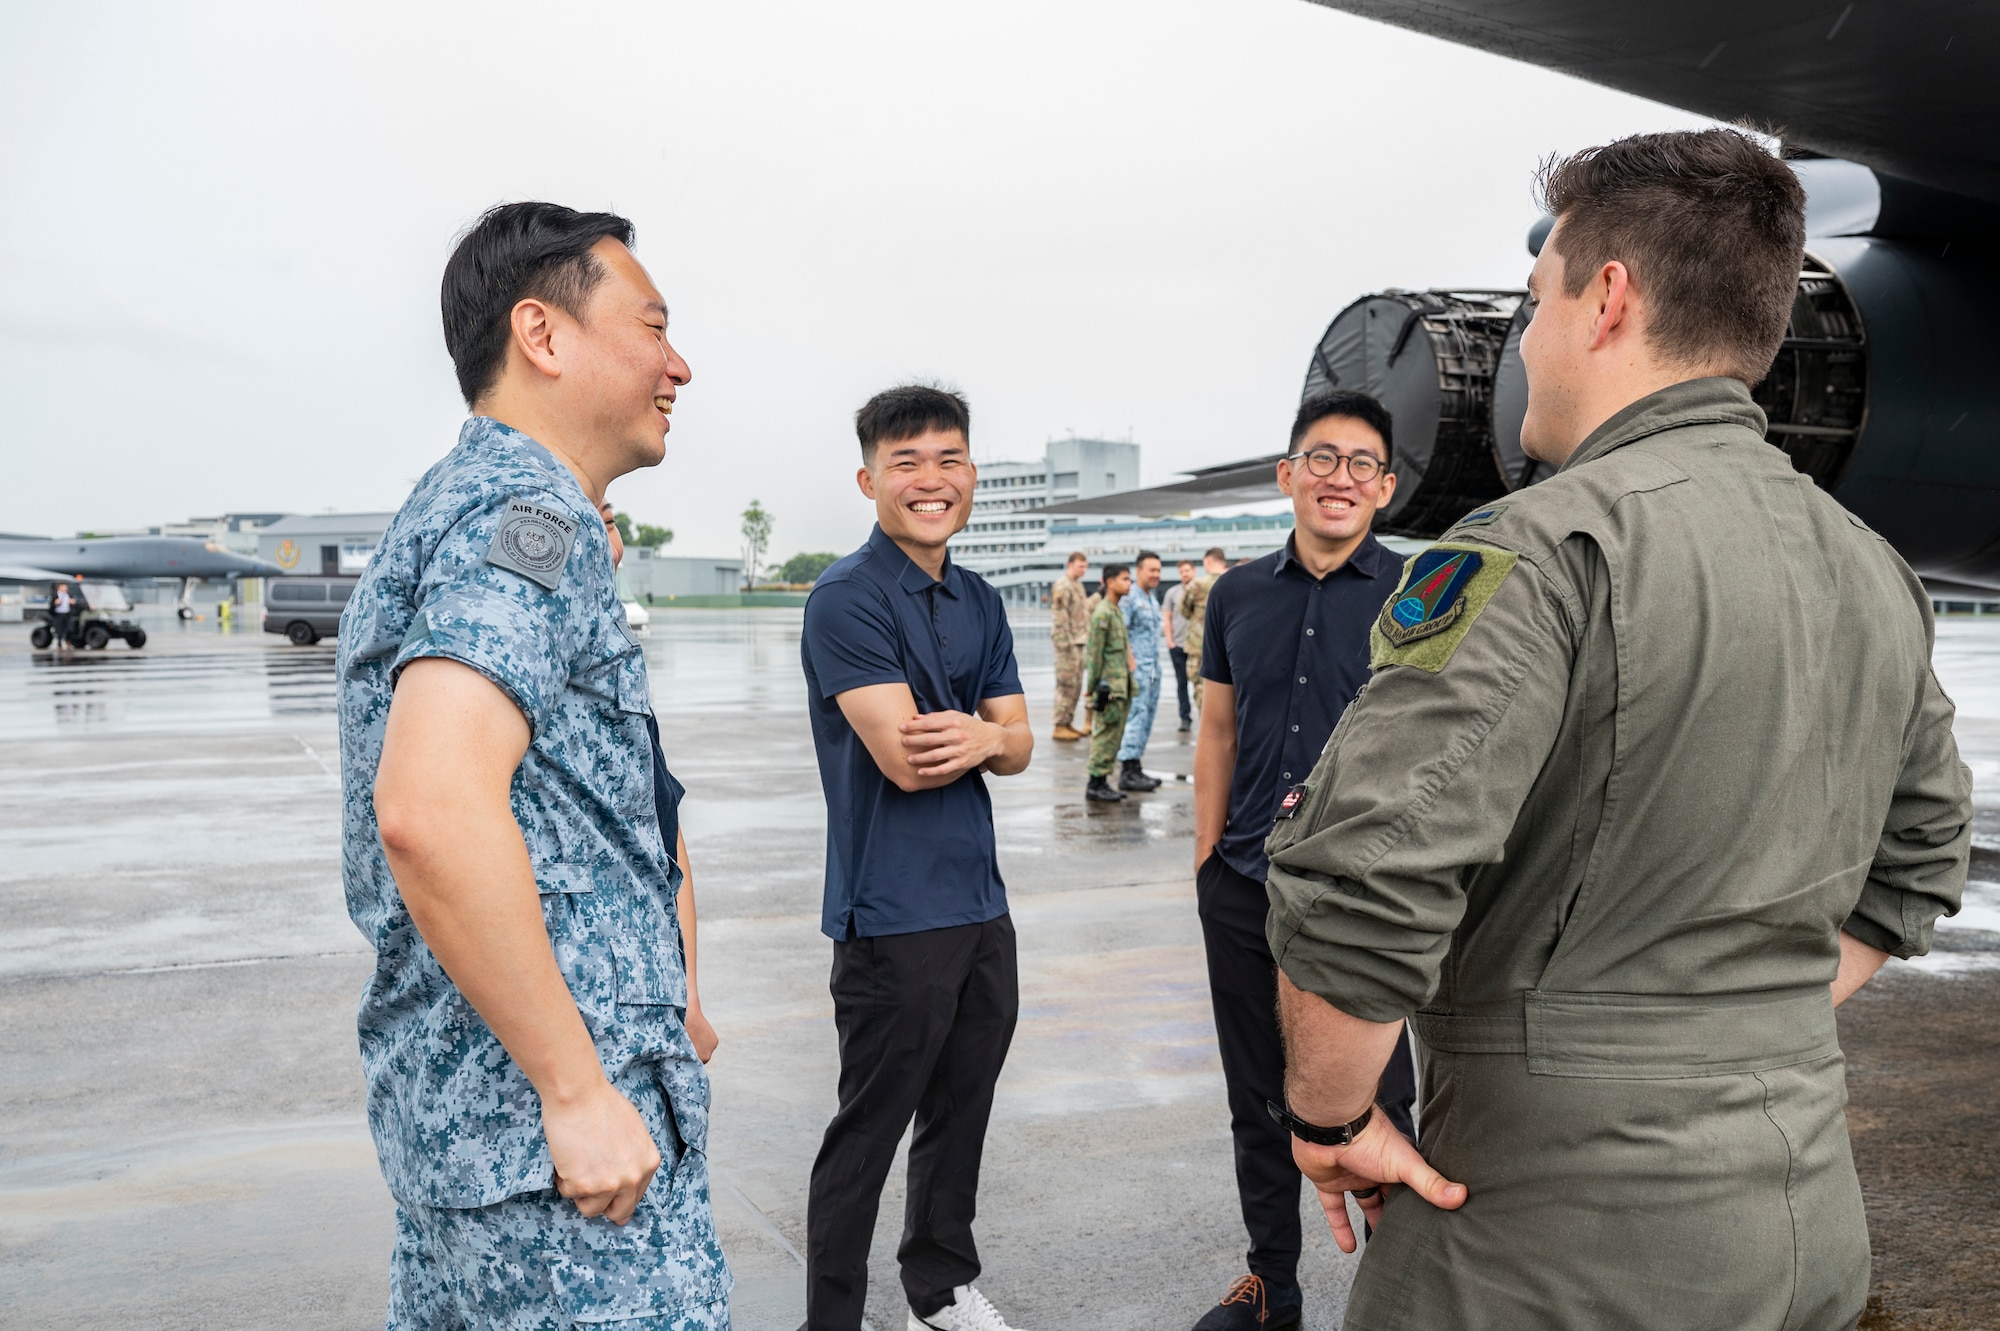 U.S. Air Force 1st Lt. Hayden Gebo, 345th Expeditionary Bomb Squadron B-1B Lancer pilot, out of Dyess Air Force Base, Texas, speaks to a group during a B-1B tour at Paya Lebar Air Base, Singapore, Jan. 20, 2024.  The U.S. Air Force’s partnership with the Republic of Singapore Air Force provides valuable professional exchanges and training opportunities with different aircraft and aircrews. (U.S. Air Force Photo by Senior Airman Ryan Hayman)